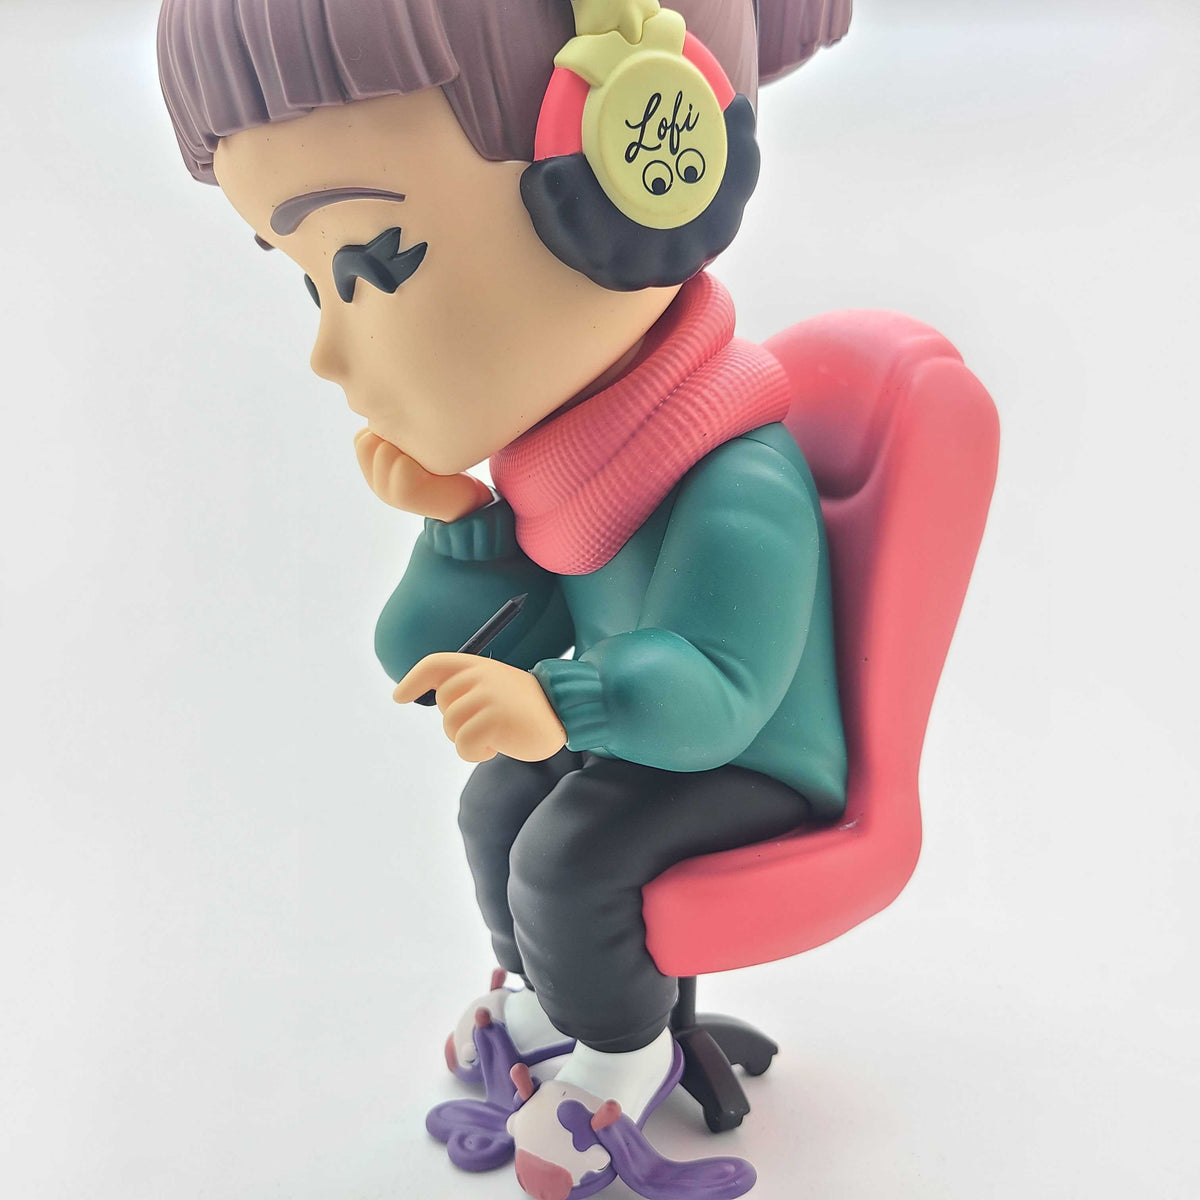 Lofi Girl (1ft) (*Broken Lamp*) Toy Figure by Youtooz Collectibles